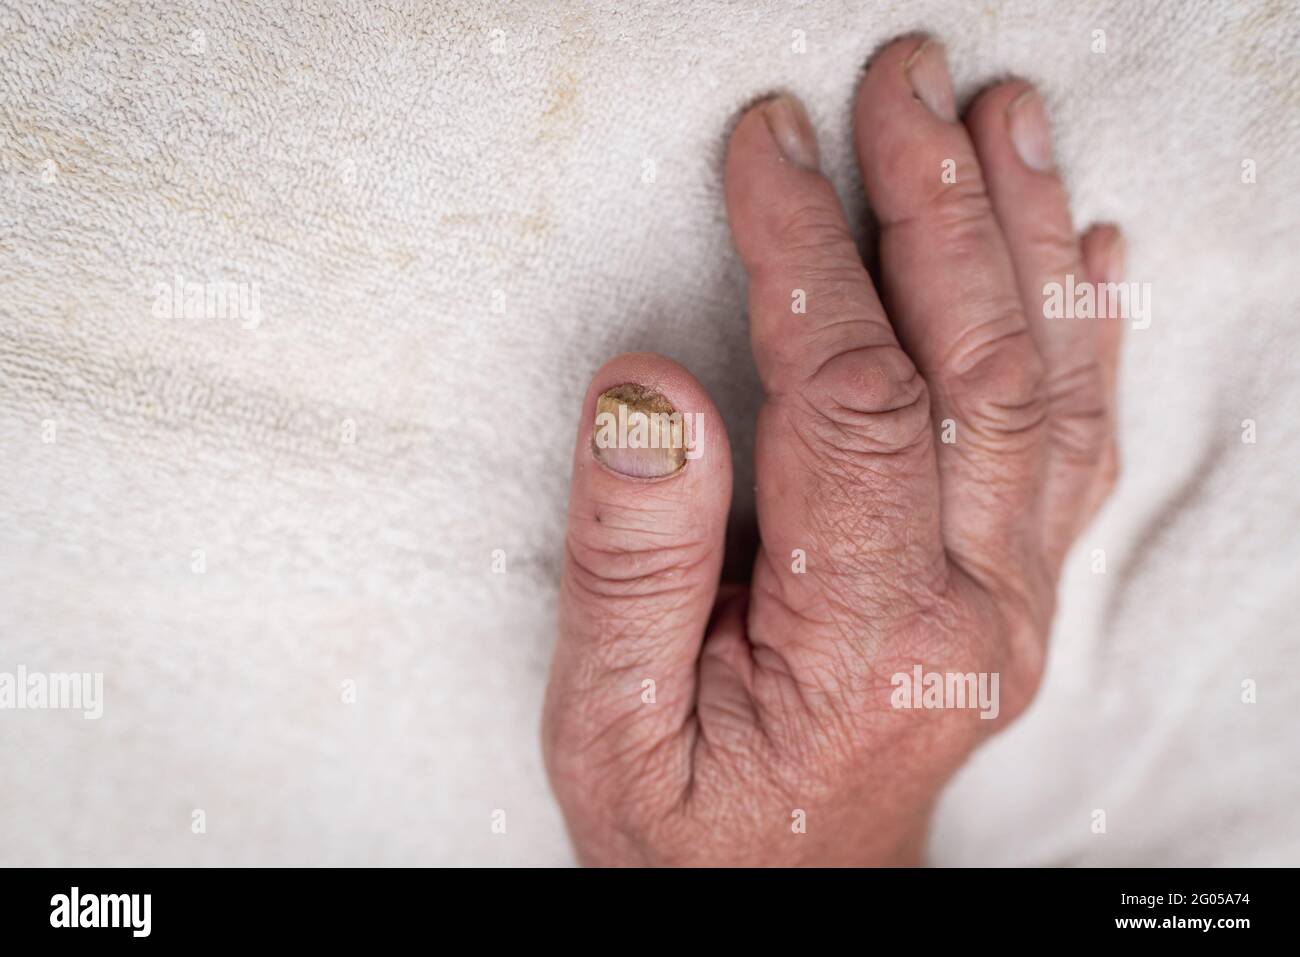 Premium Photo | Male cut nails with nail fungus fungal infection on nails  legs finger with onychomycosis care and treatment closeup of a foot with  damaged nails because of fungus